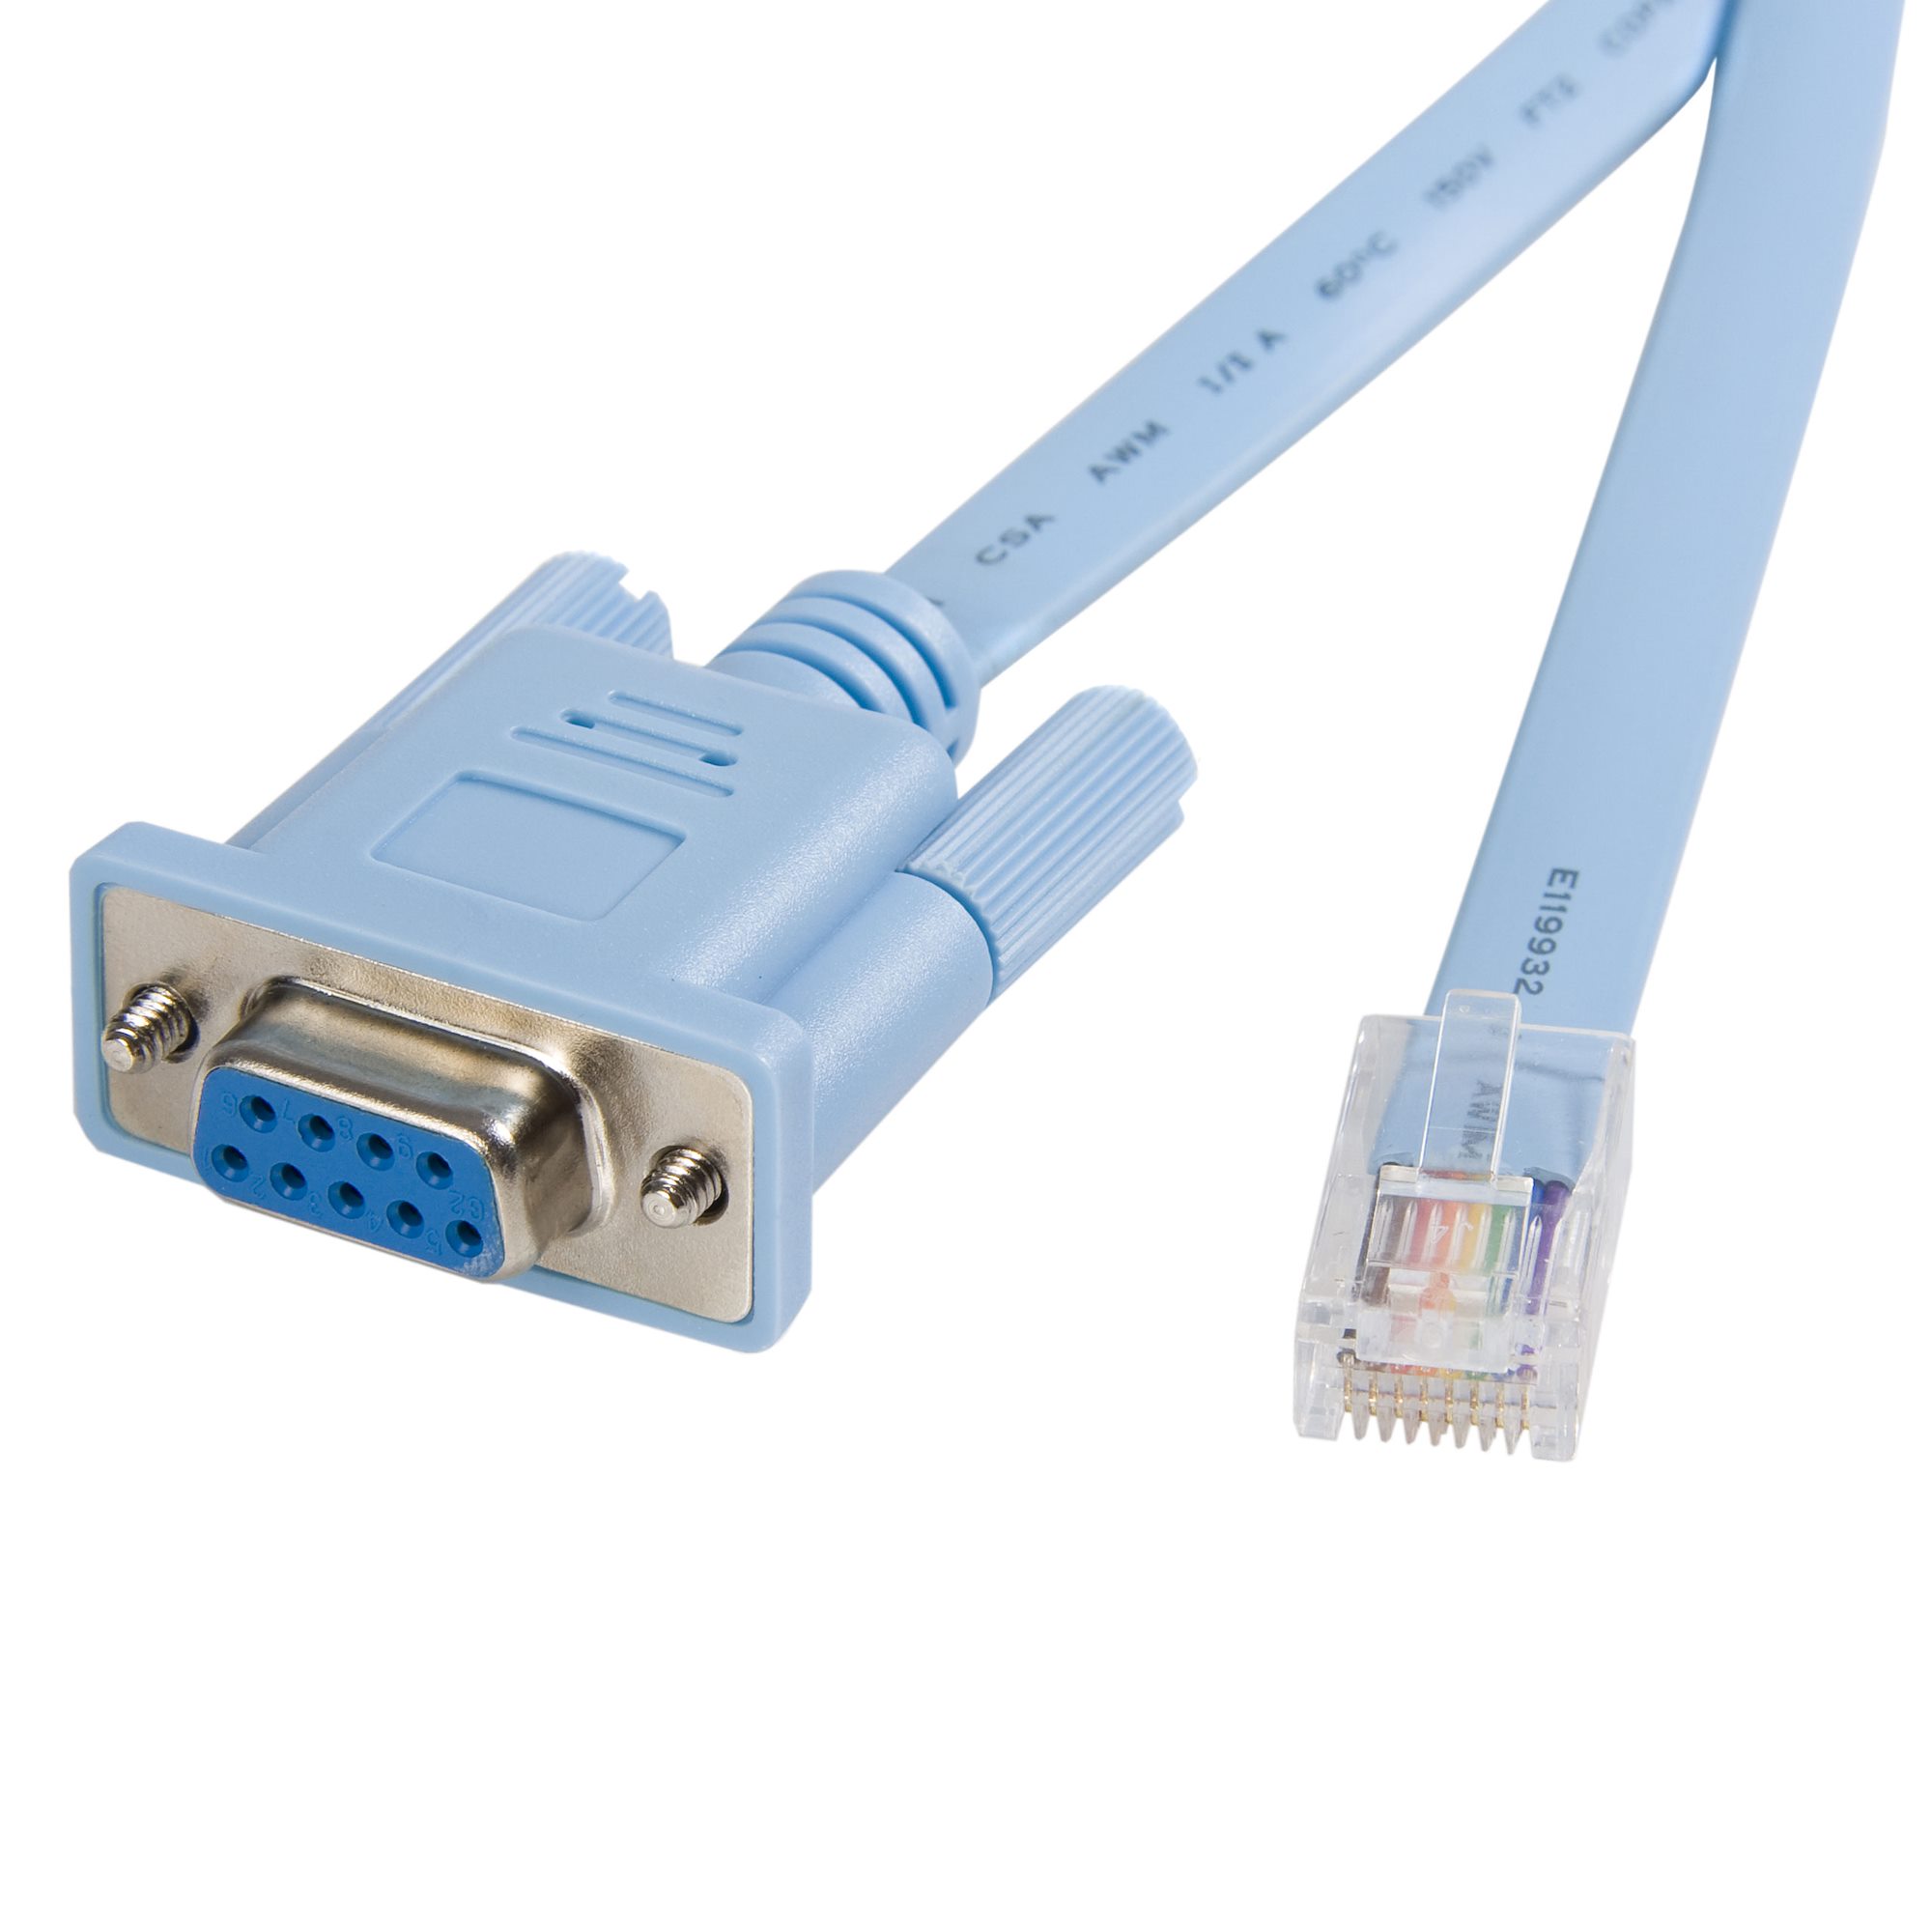 new Console Cable Router Rs232 DB9 To RJ45 for Cisco device cord 